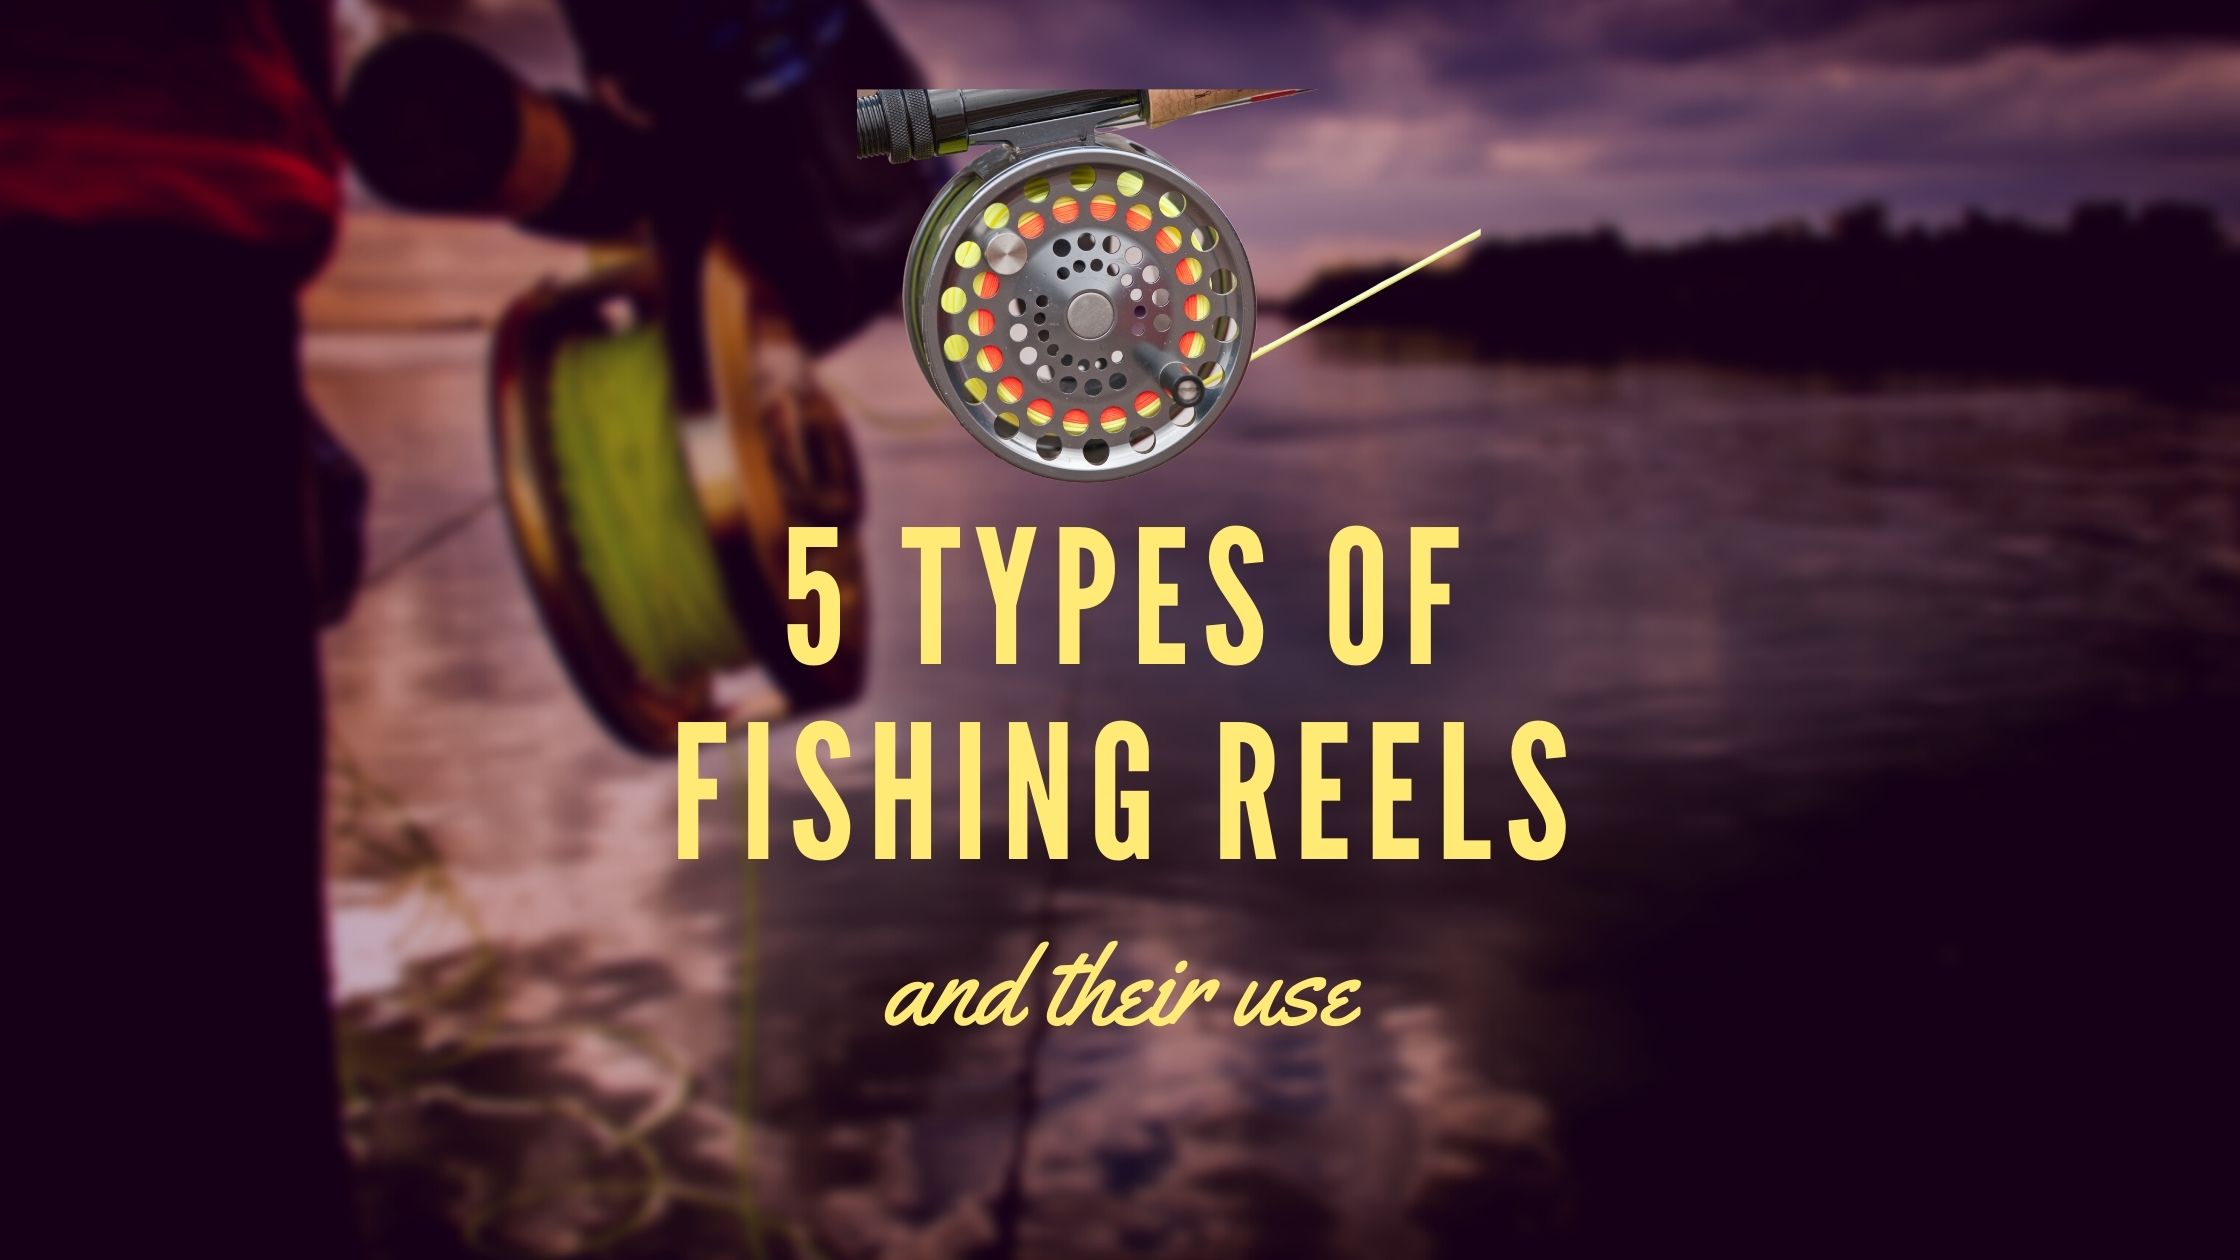 5 Types of Fishing Reels and Their Use